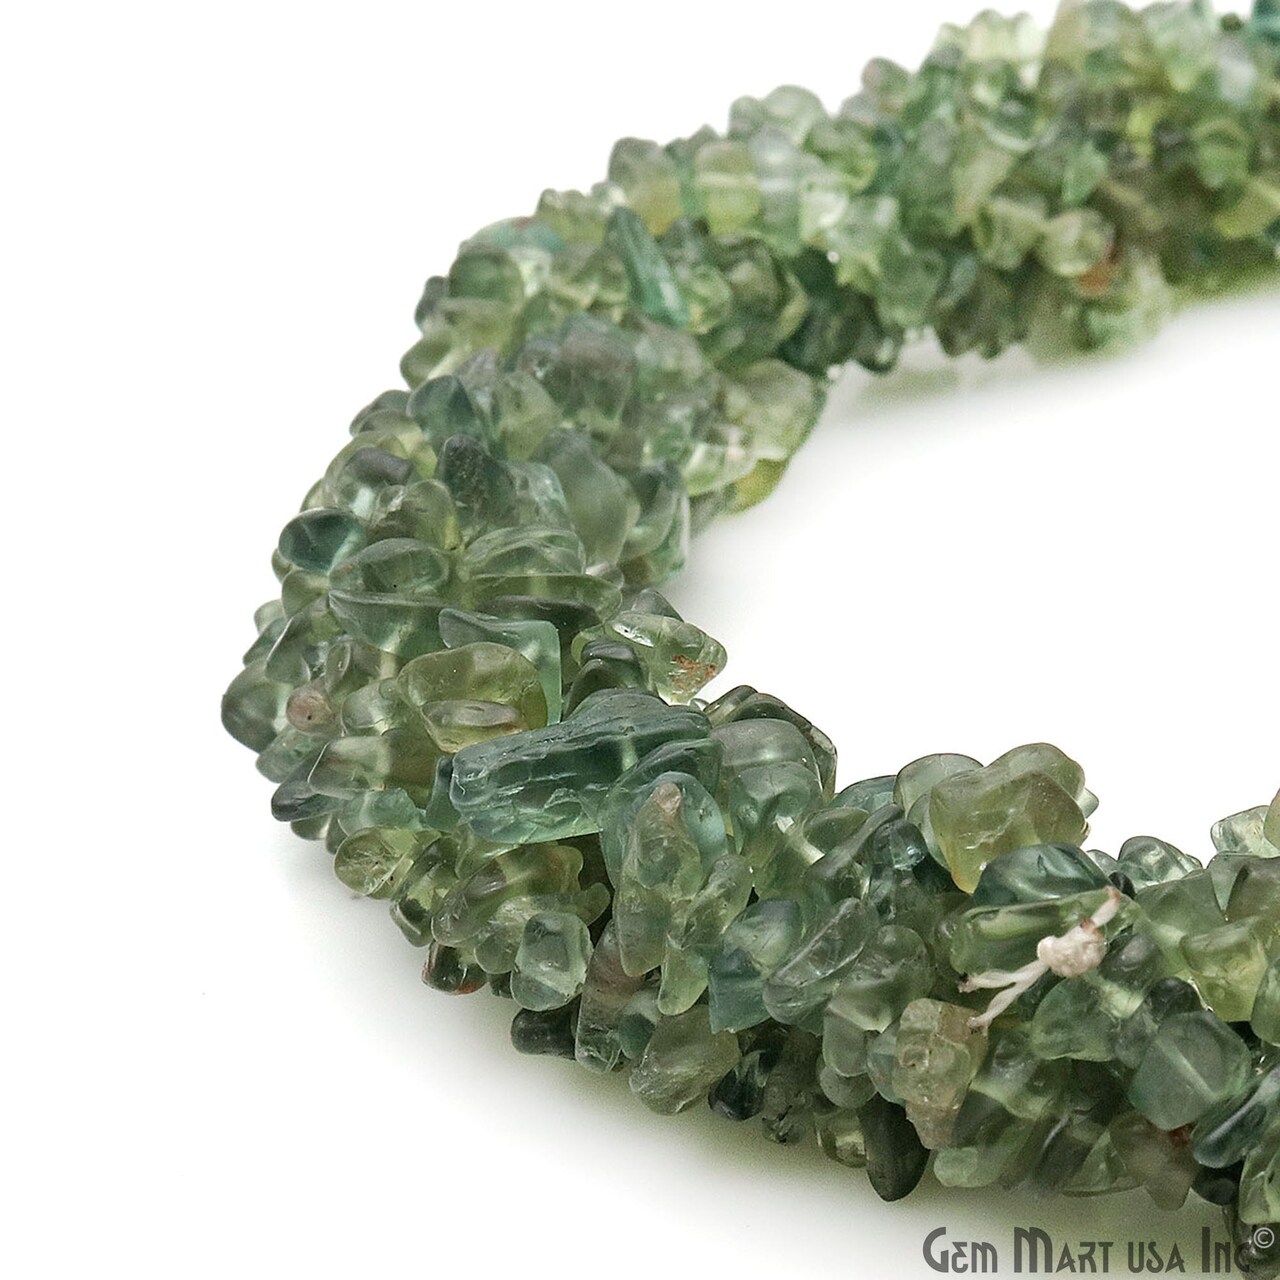 Green Apatite Chip Beads, 34 Inch Chip Strands, Drilled Strung Nugget Beads, Natural Raw Green Apatite, 3-7mm, Polished, GemMartUSA (CHAG-70001)